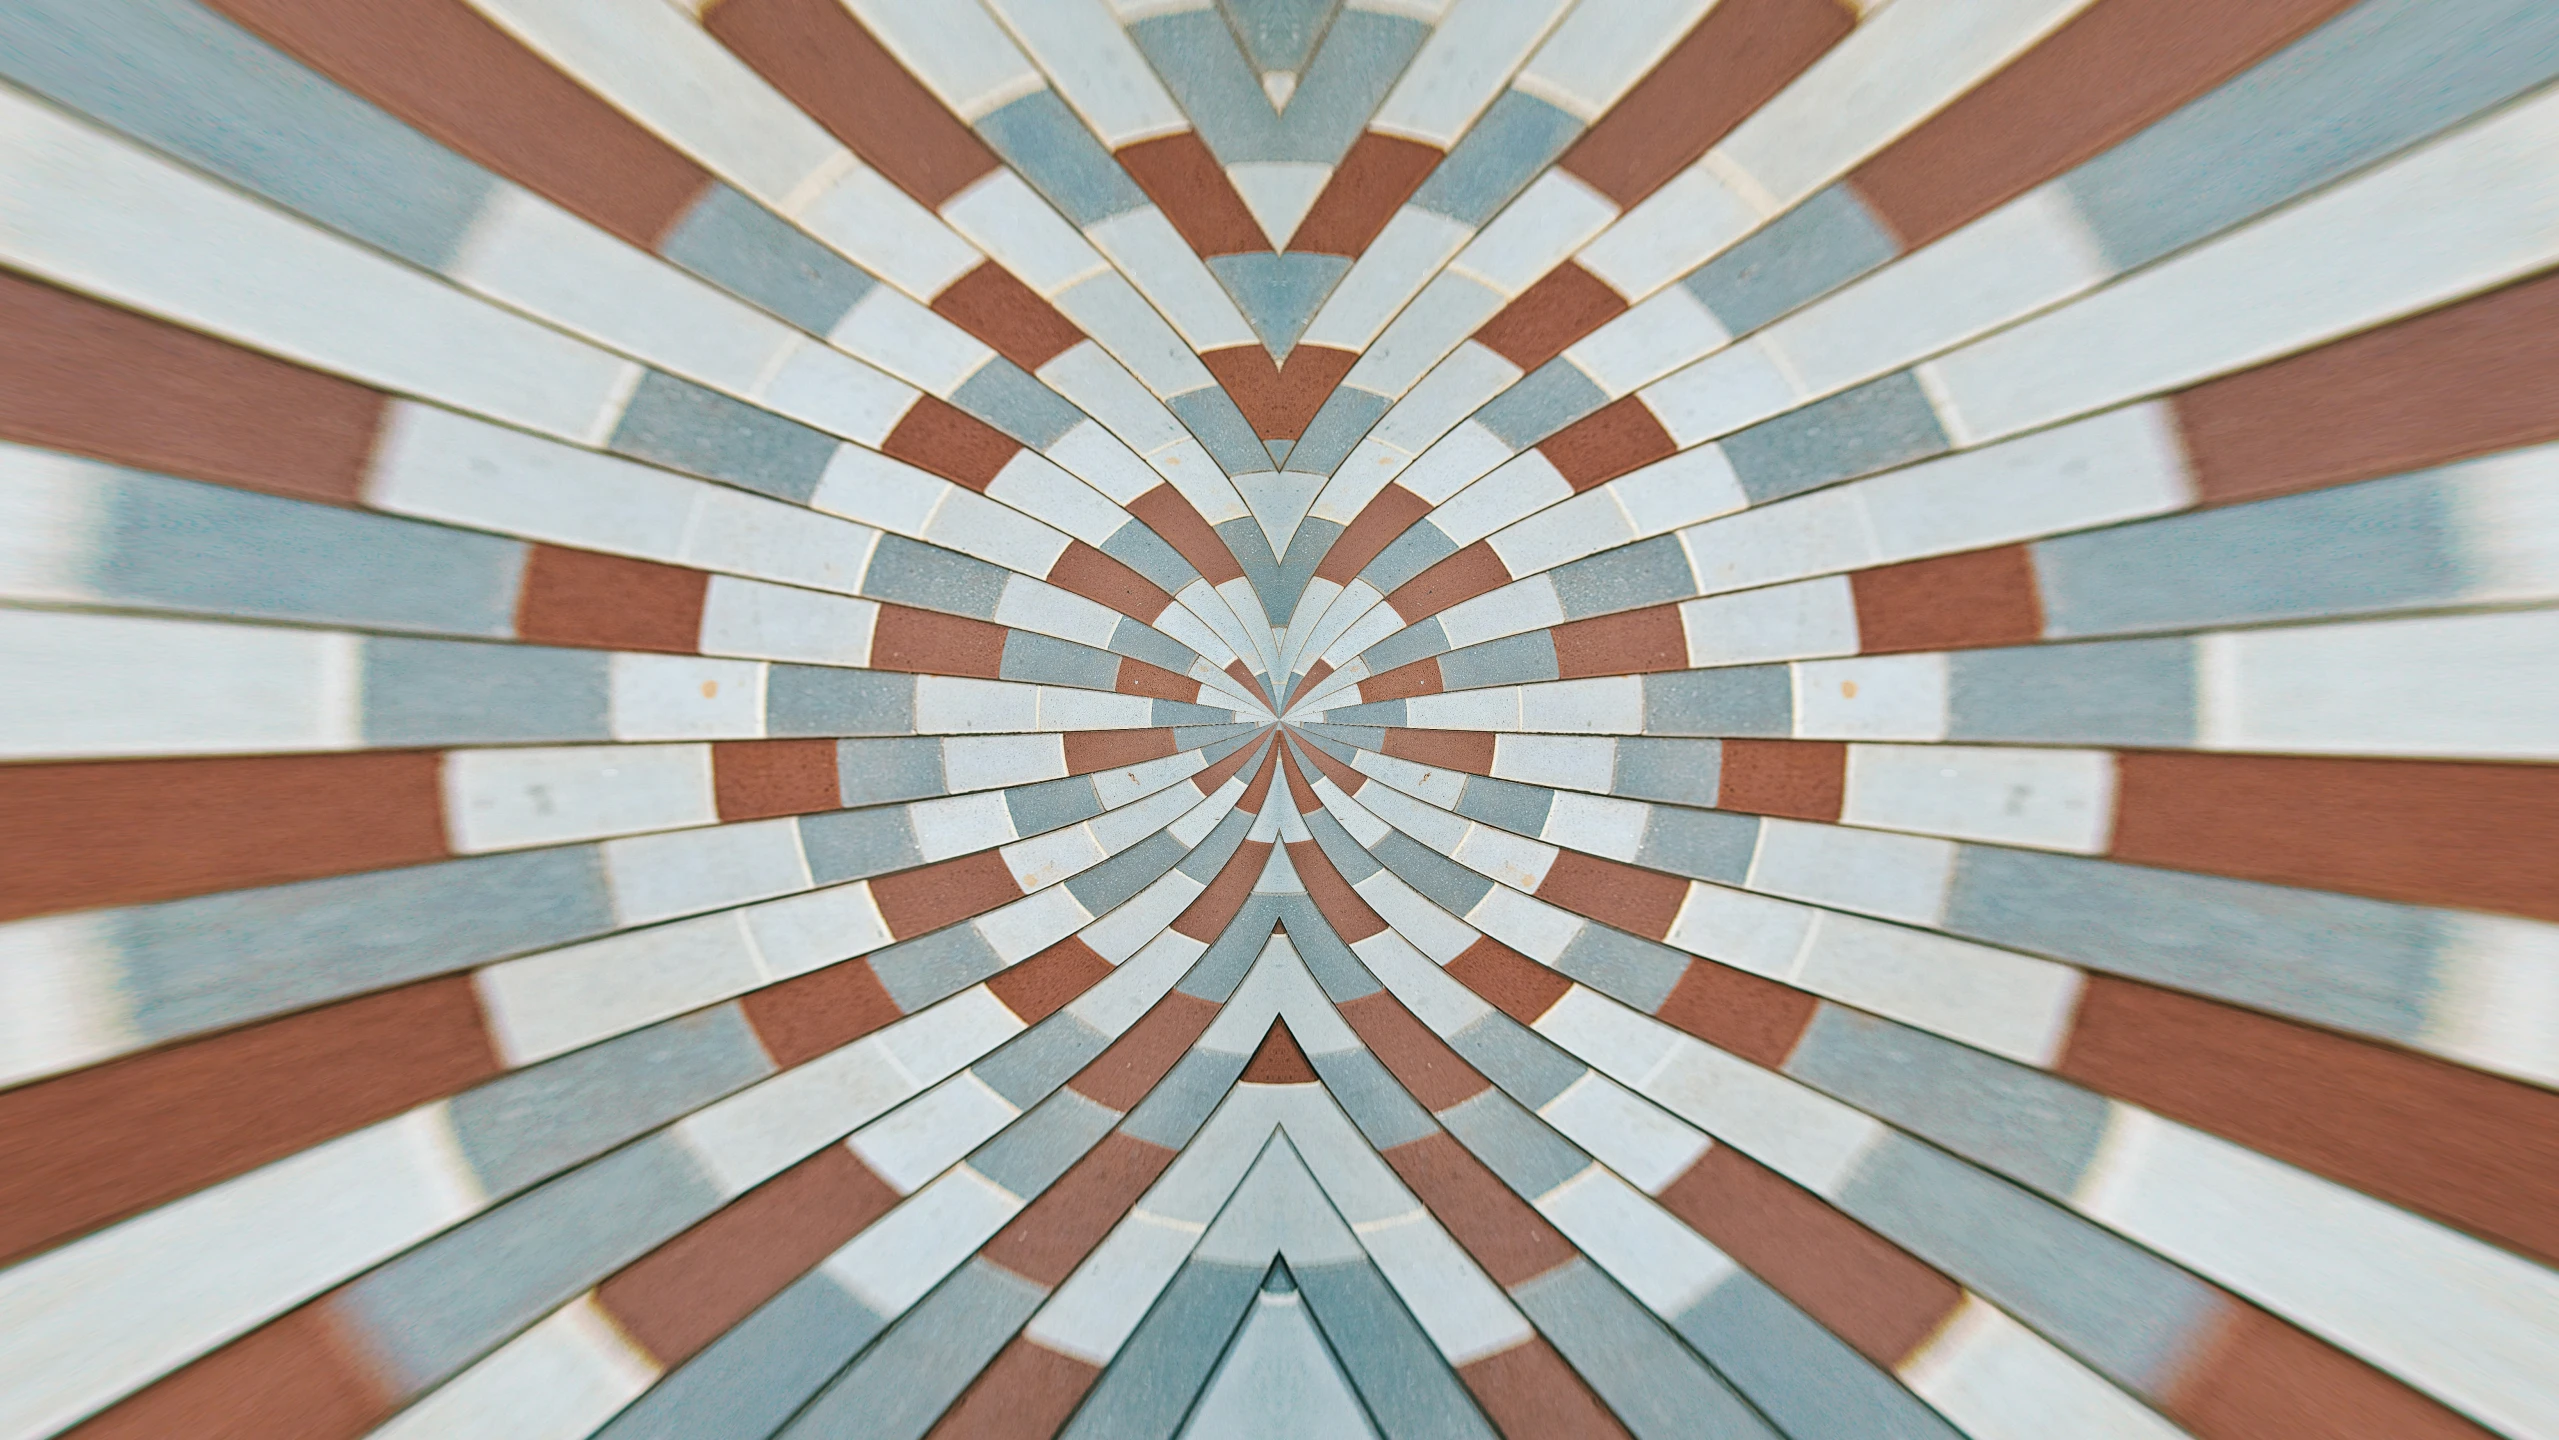 an abstract picture with a geometric pattern in orange, gray and white